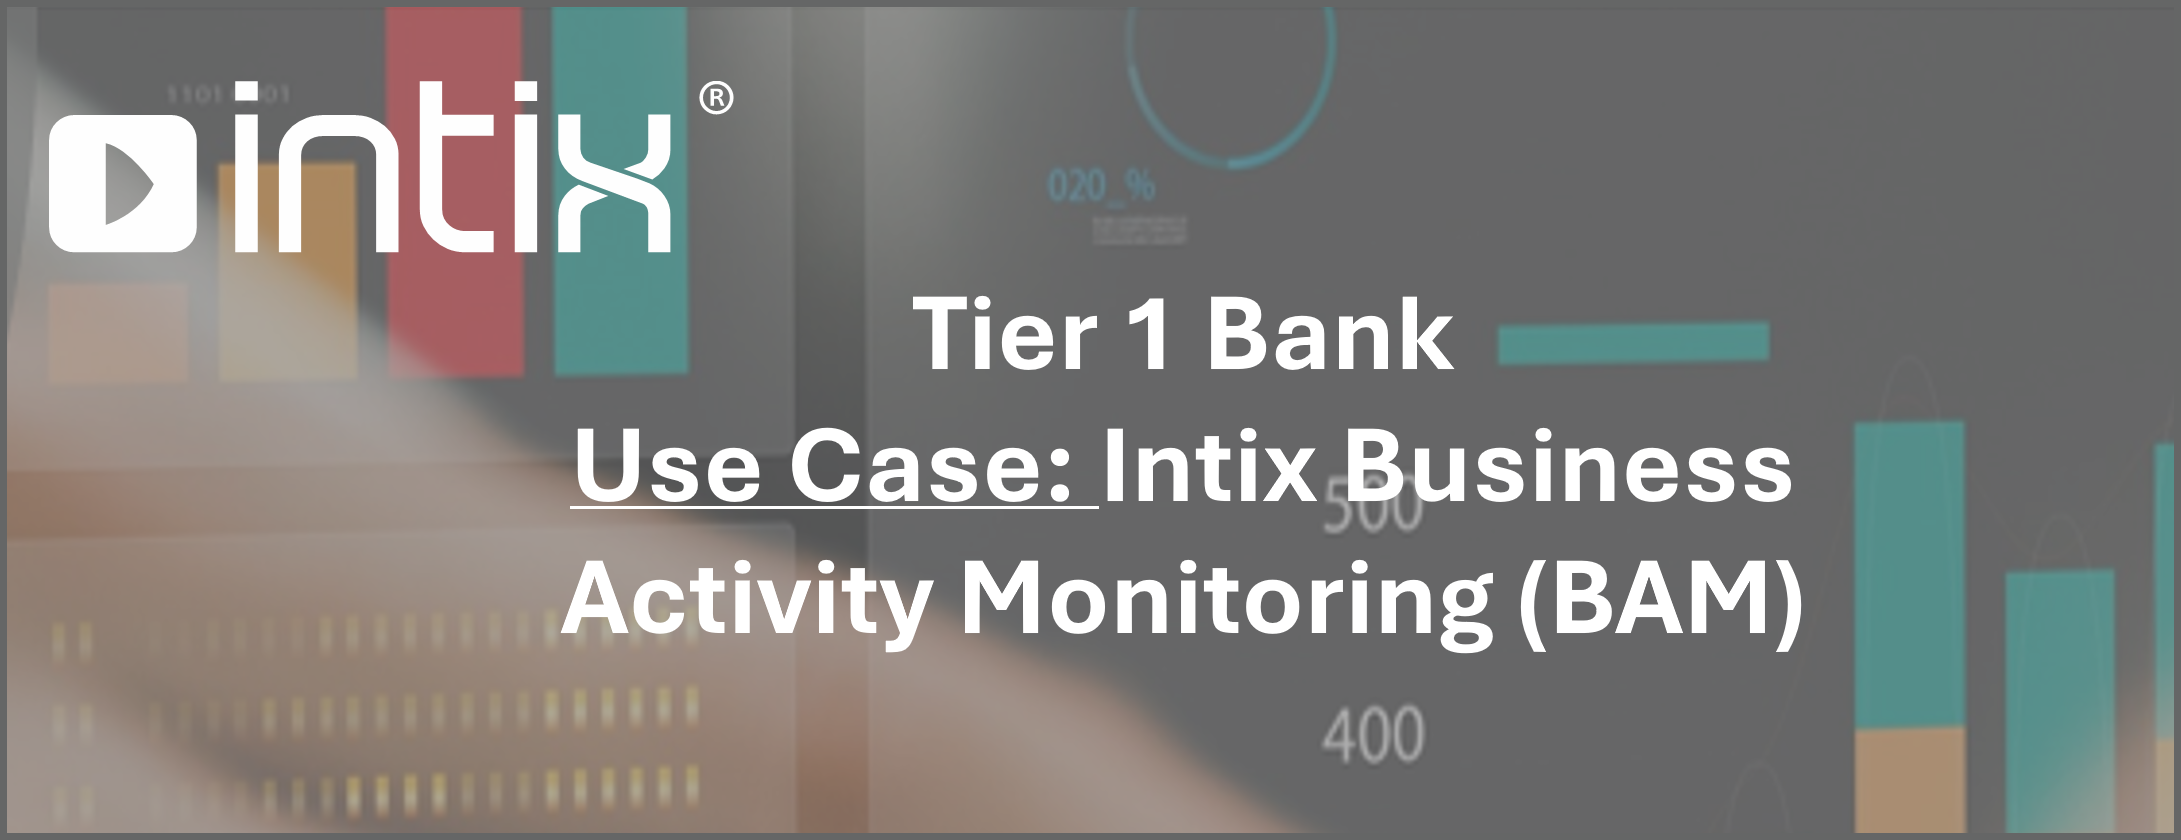 Corporate presentation slide for "intix business activity monitoring (bam)" with the title "tier 1 bank use case," displaying graphs and the intix logo.